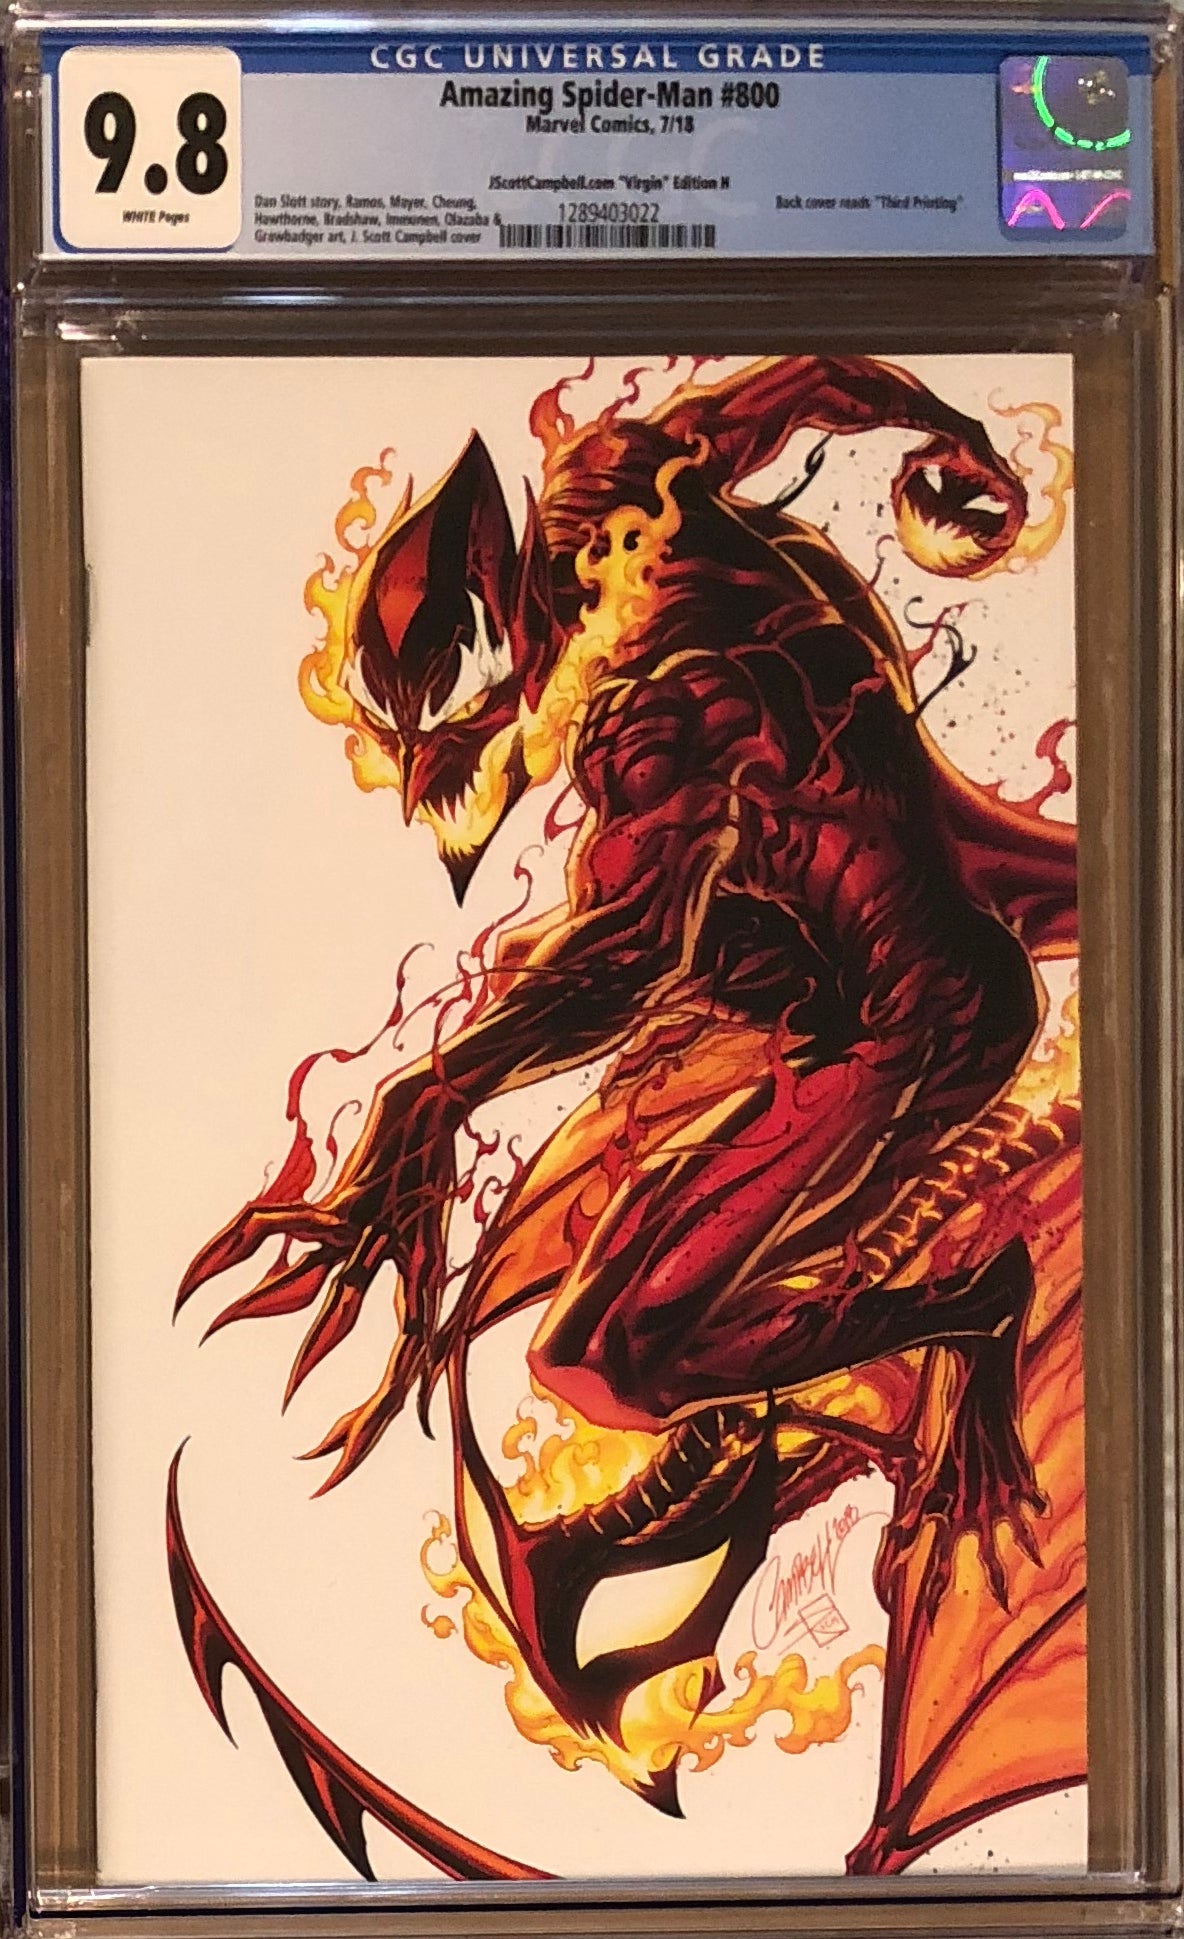 Amazing Spider-Man #800 J. Scott Campbell Edition H "Red Goblin" SDCC Virgin Exclusive CGC 9.8